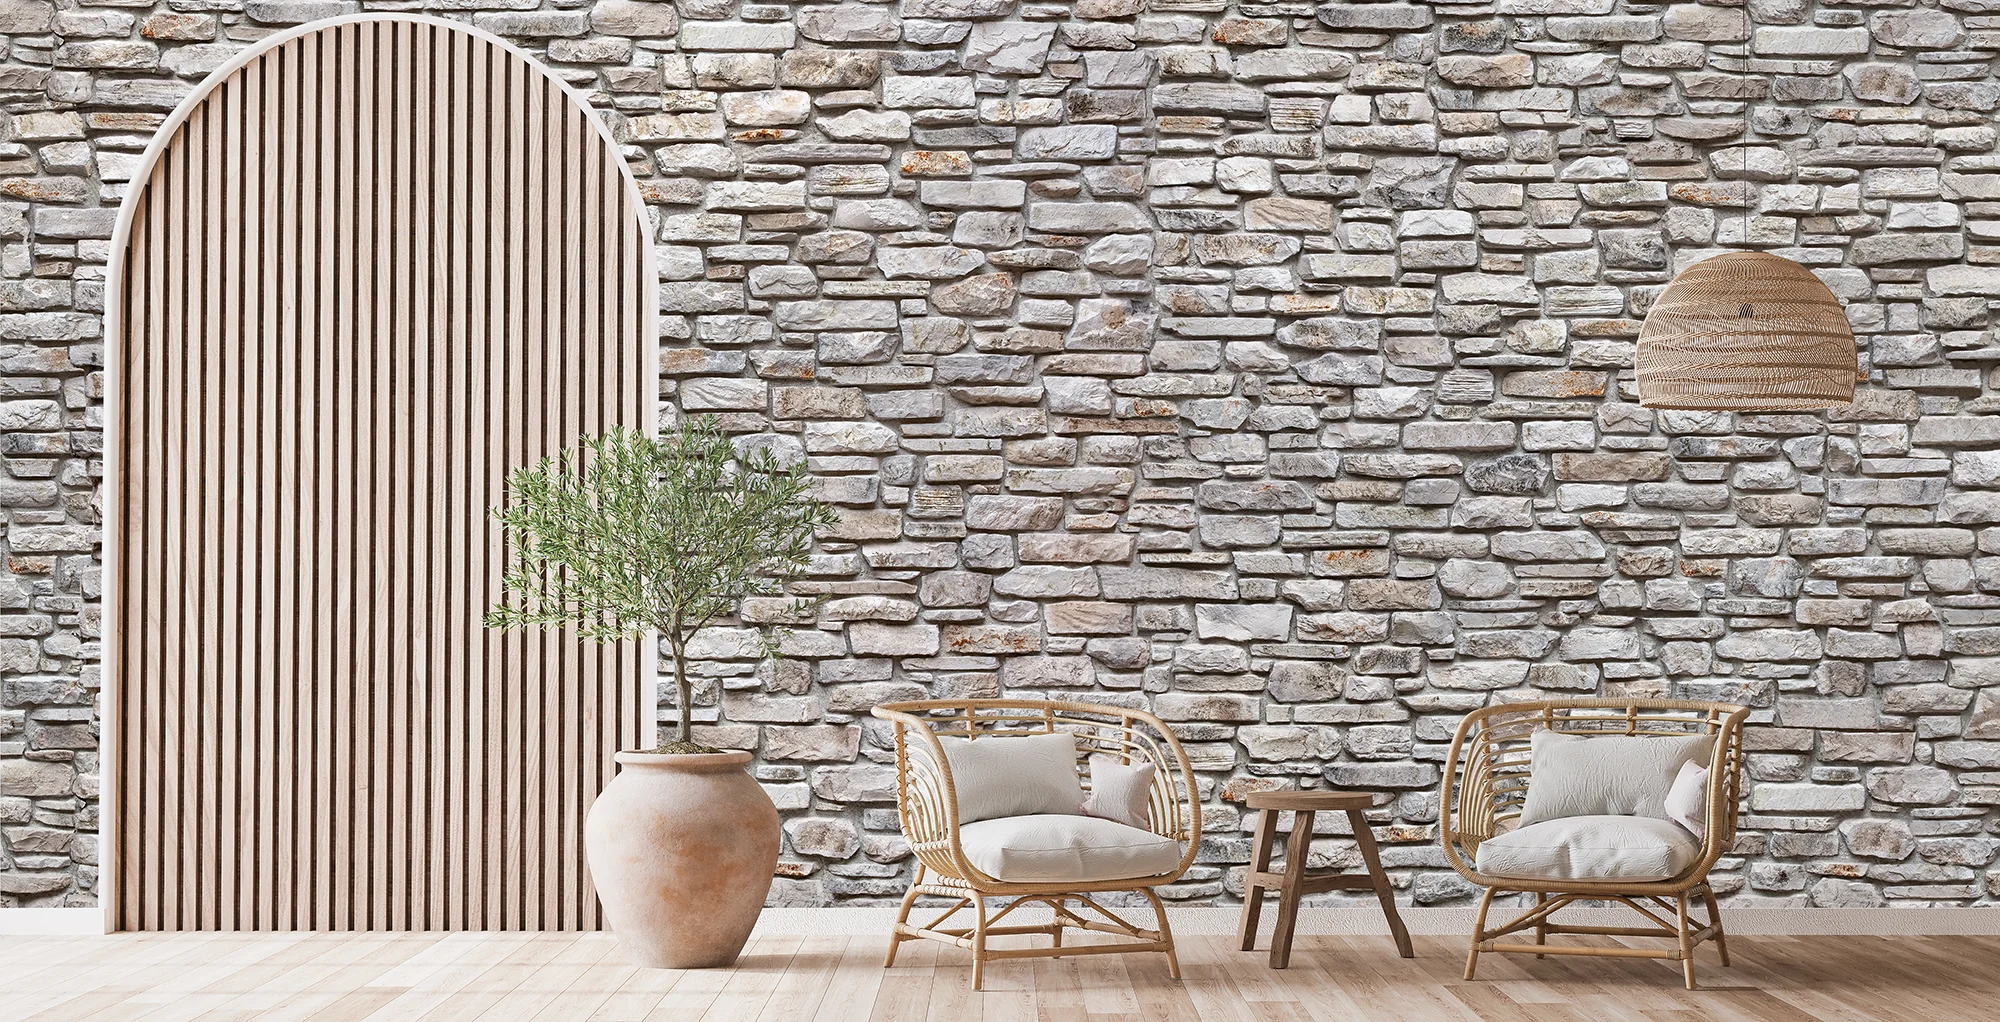 Light colored stone wall with bambu chairs